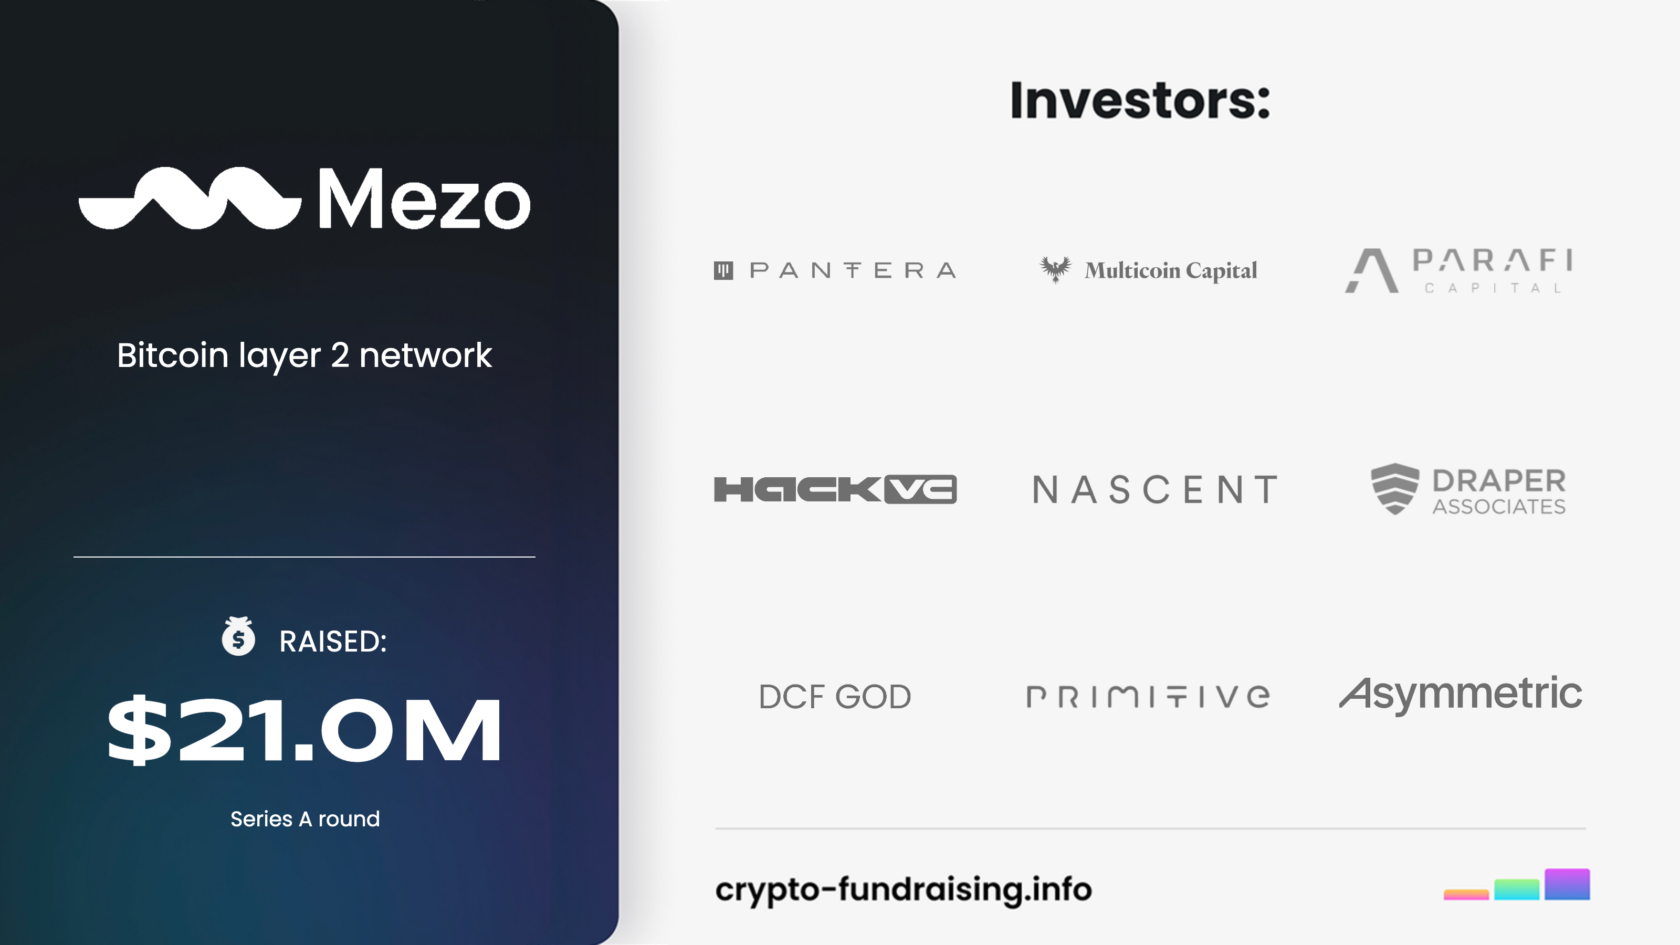 Mezo raised $21M in a Series A funding round